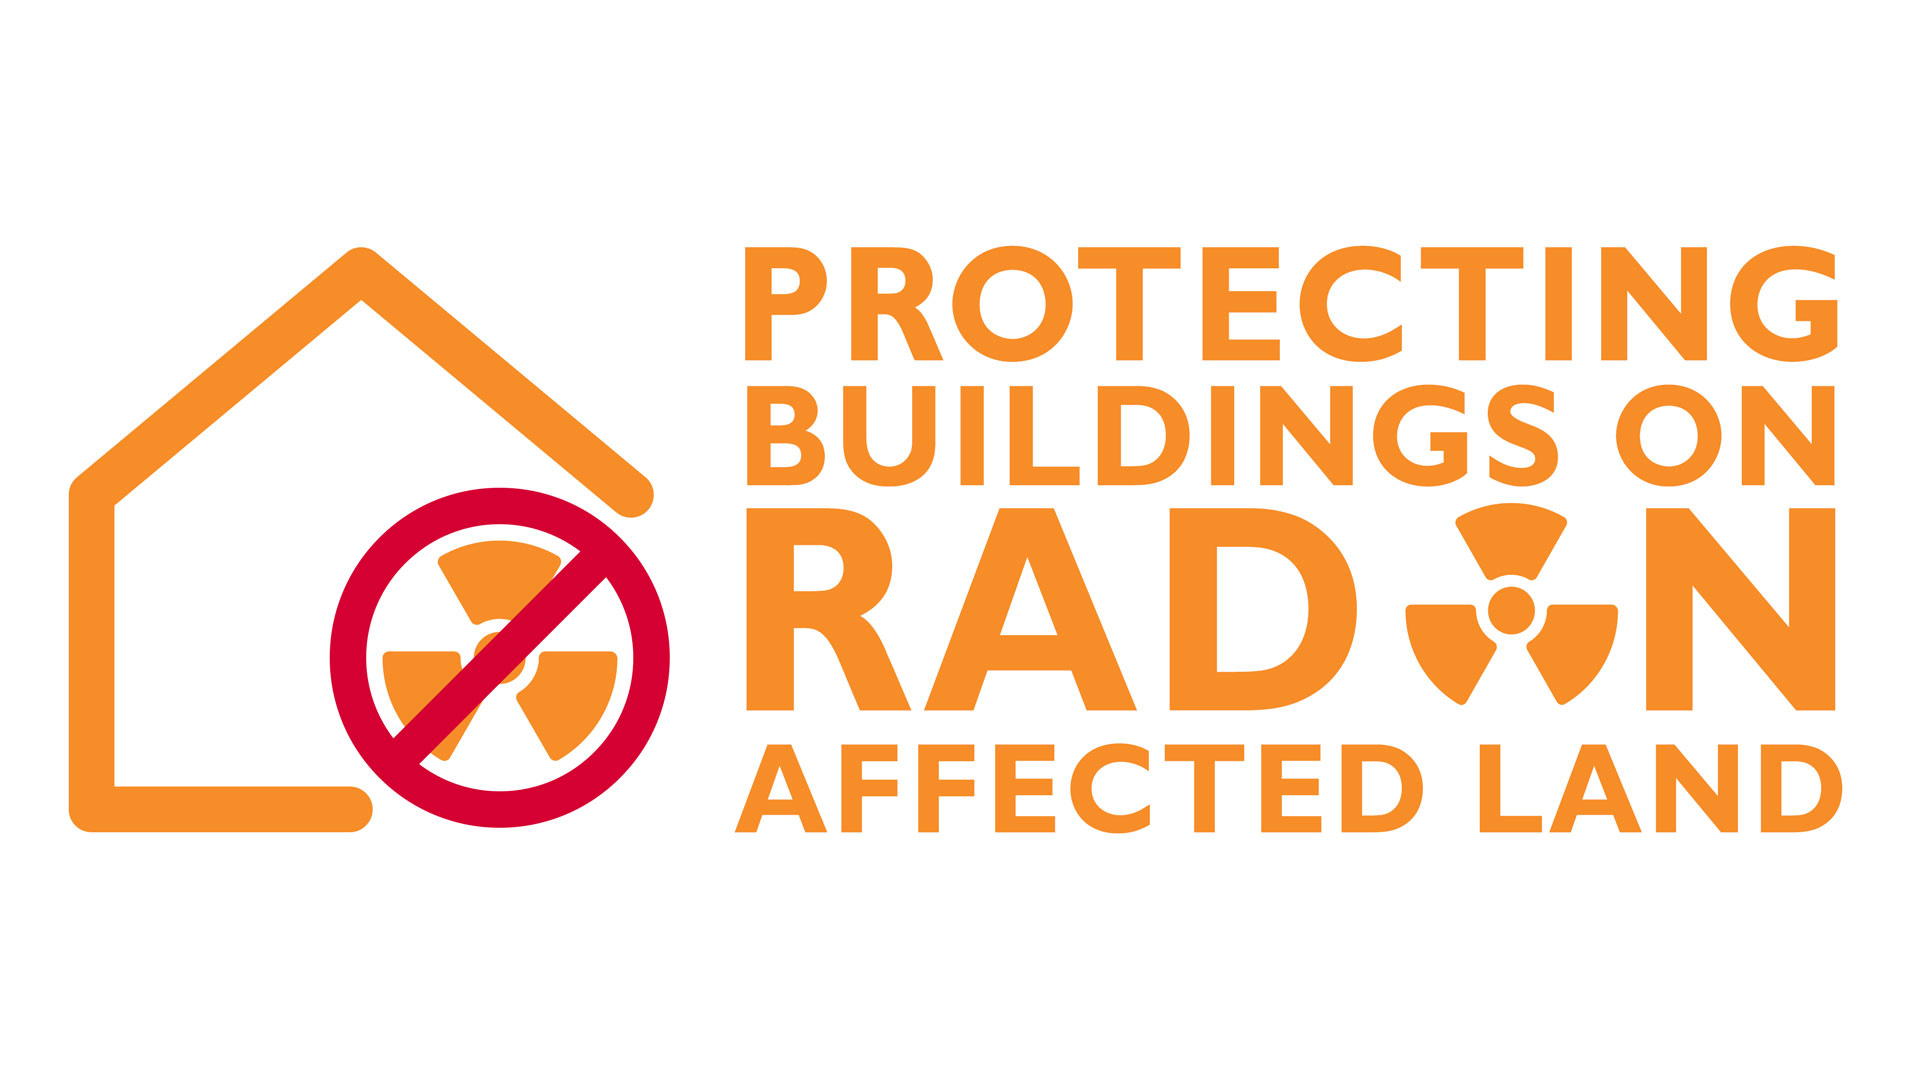 Welcome to our 30-minute webinar, "Protecting Buildings On Radon Affected Land". Radon is a topic that's becoming more important across the industry, having long been regarded as something that only affected projects in specific geographical areas.